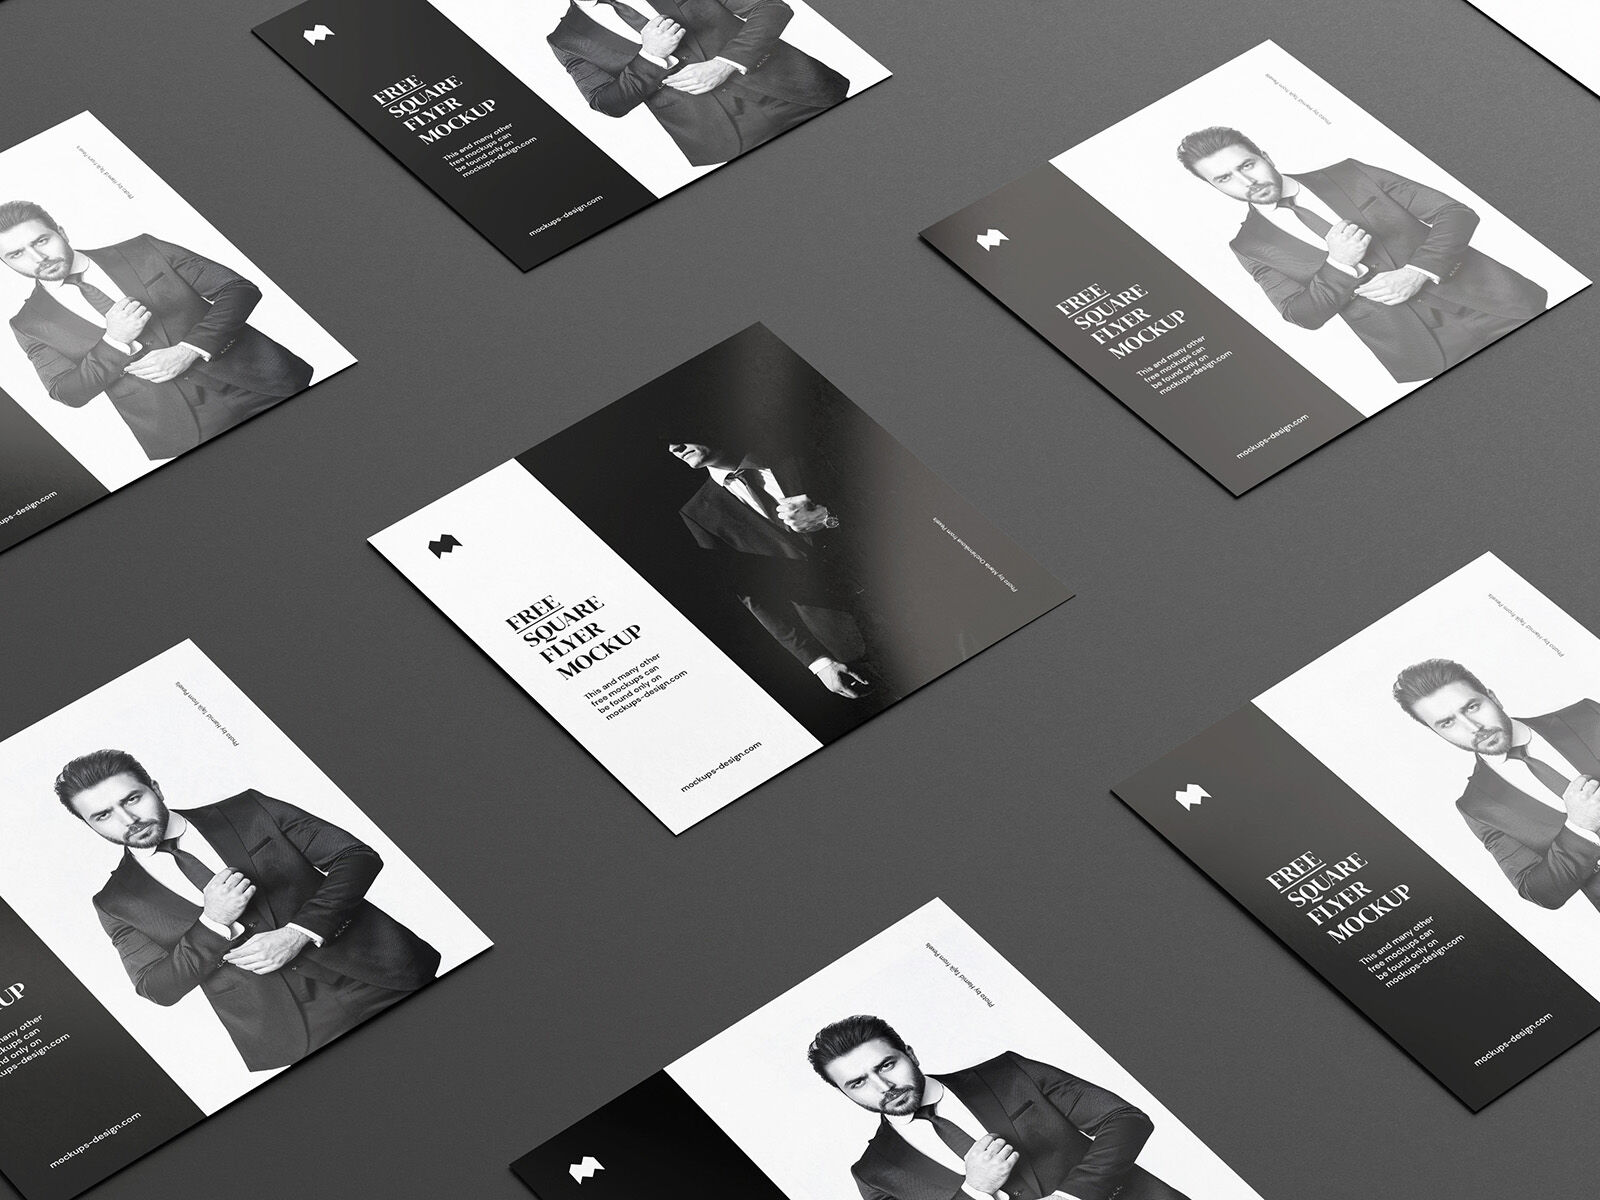 Six Mockups of Square Flyers in Different Angles FREE PSD